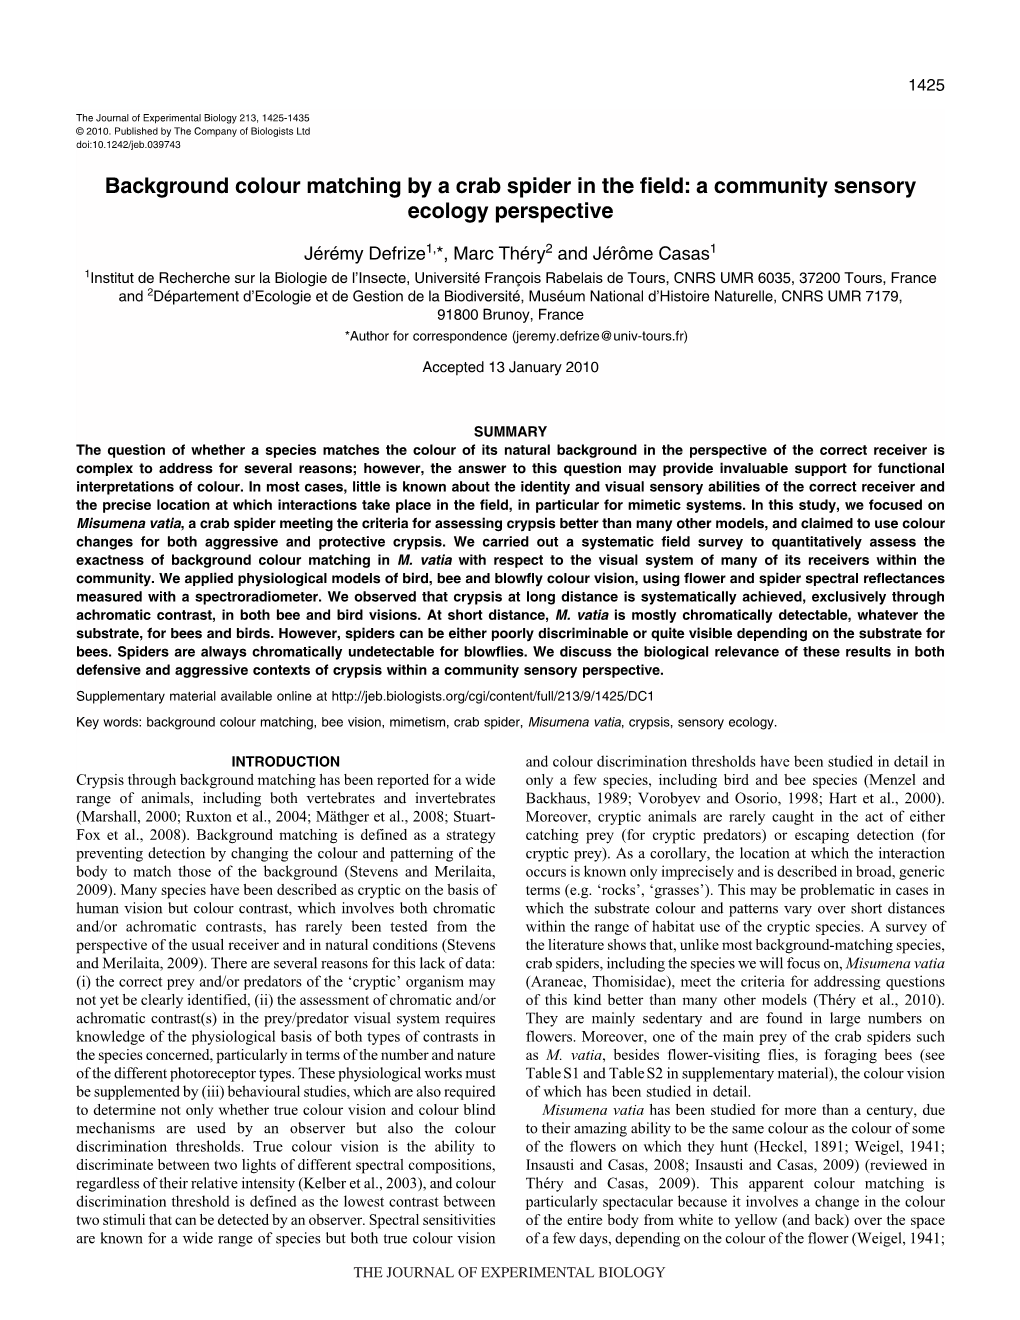 Background Colour Matching by a Crab Spider in the Field: a Community Sensory Ecology Perspective